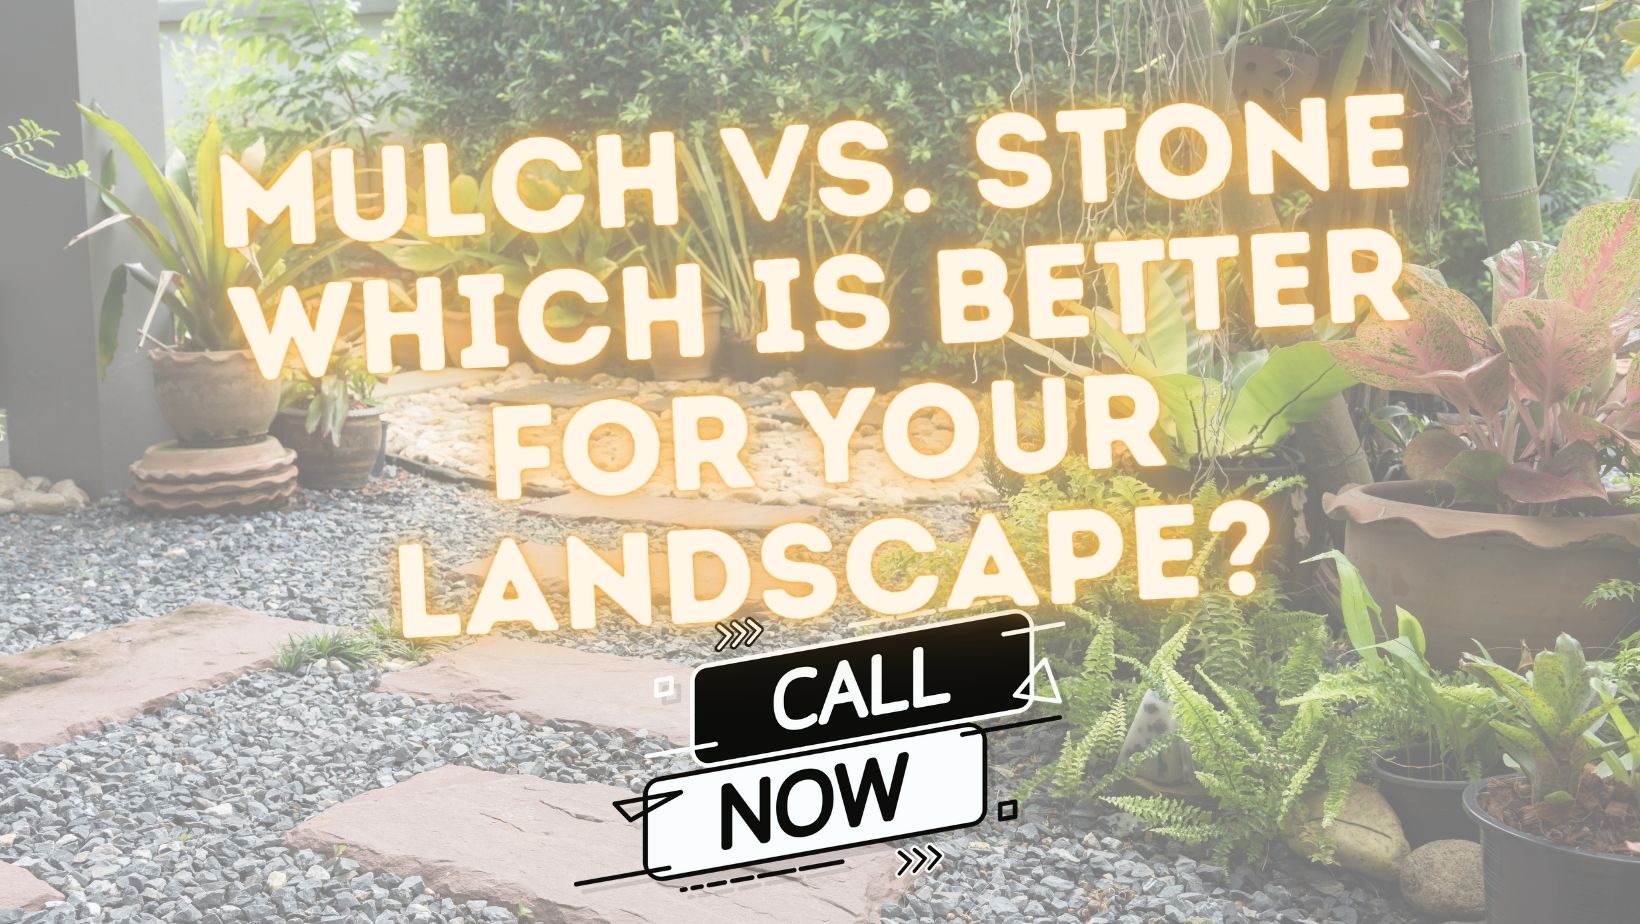 Mulch vs. Stone – Which Is Better for Your Landscape?